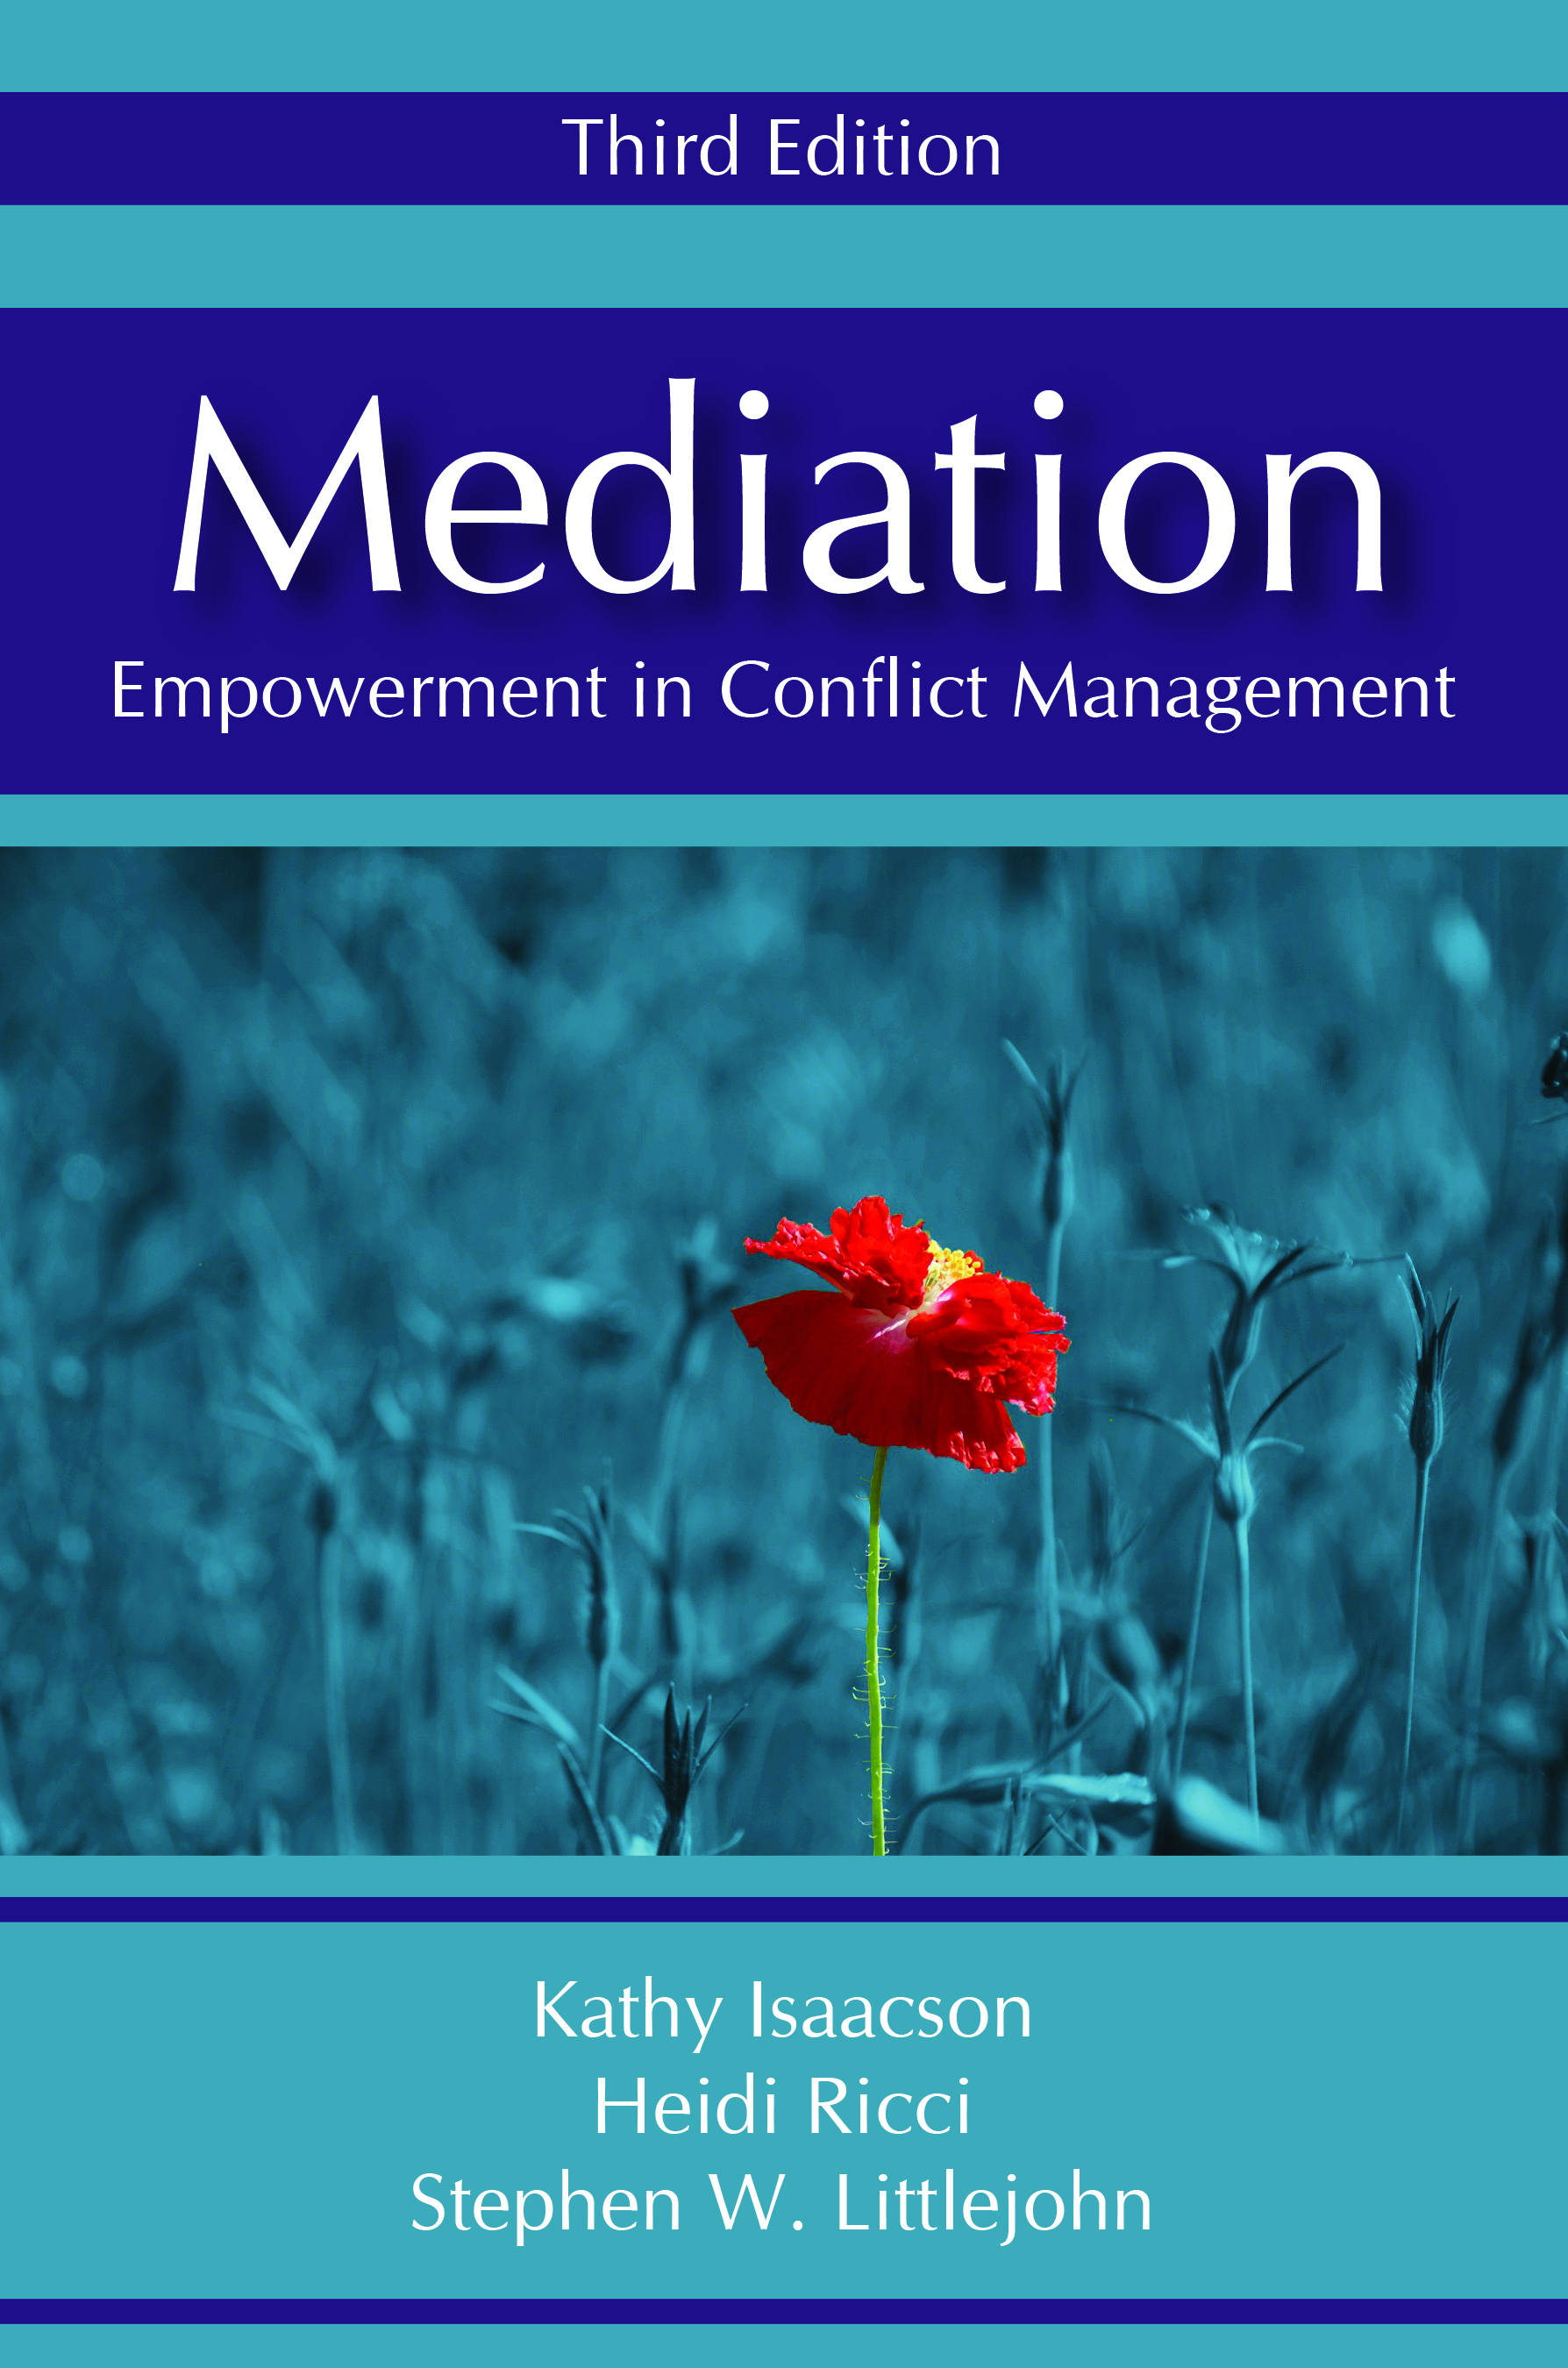 Mediation: Empowerment in Conflict Management by Kathy  Isaacson, Heidi  Ricci, Stephen W. Littlejohn